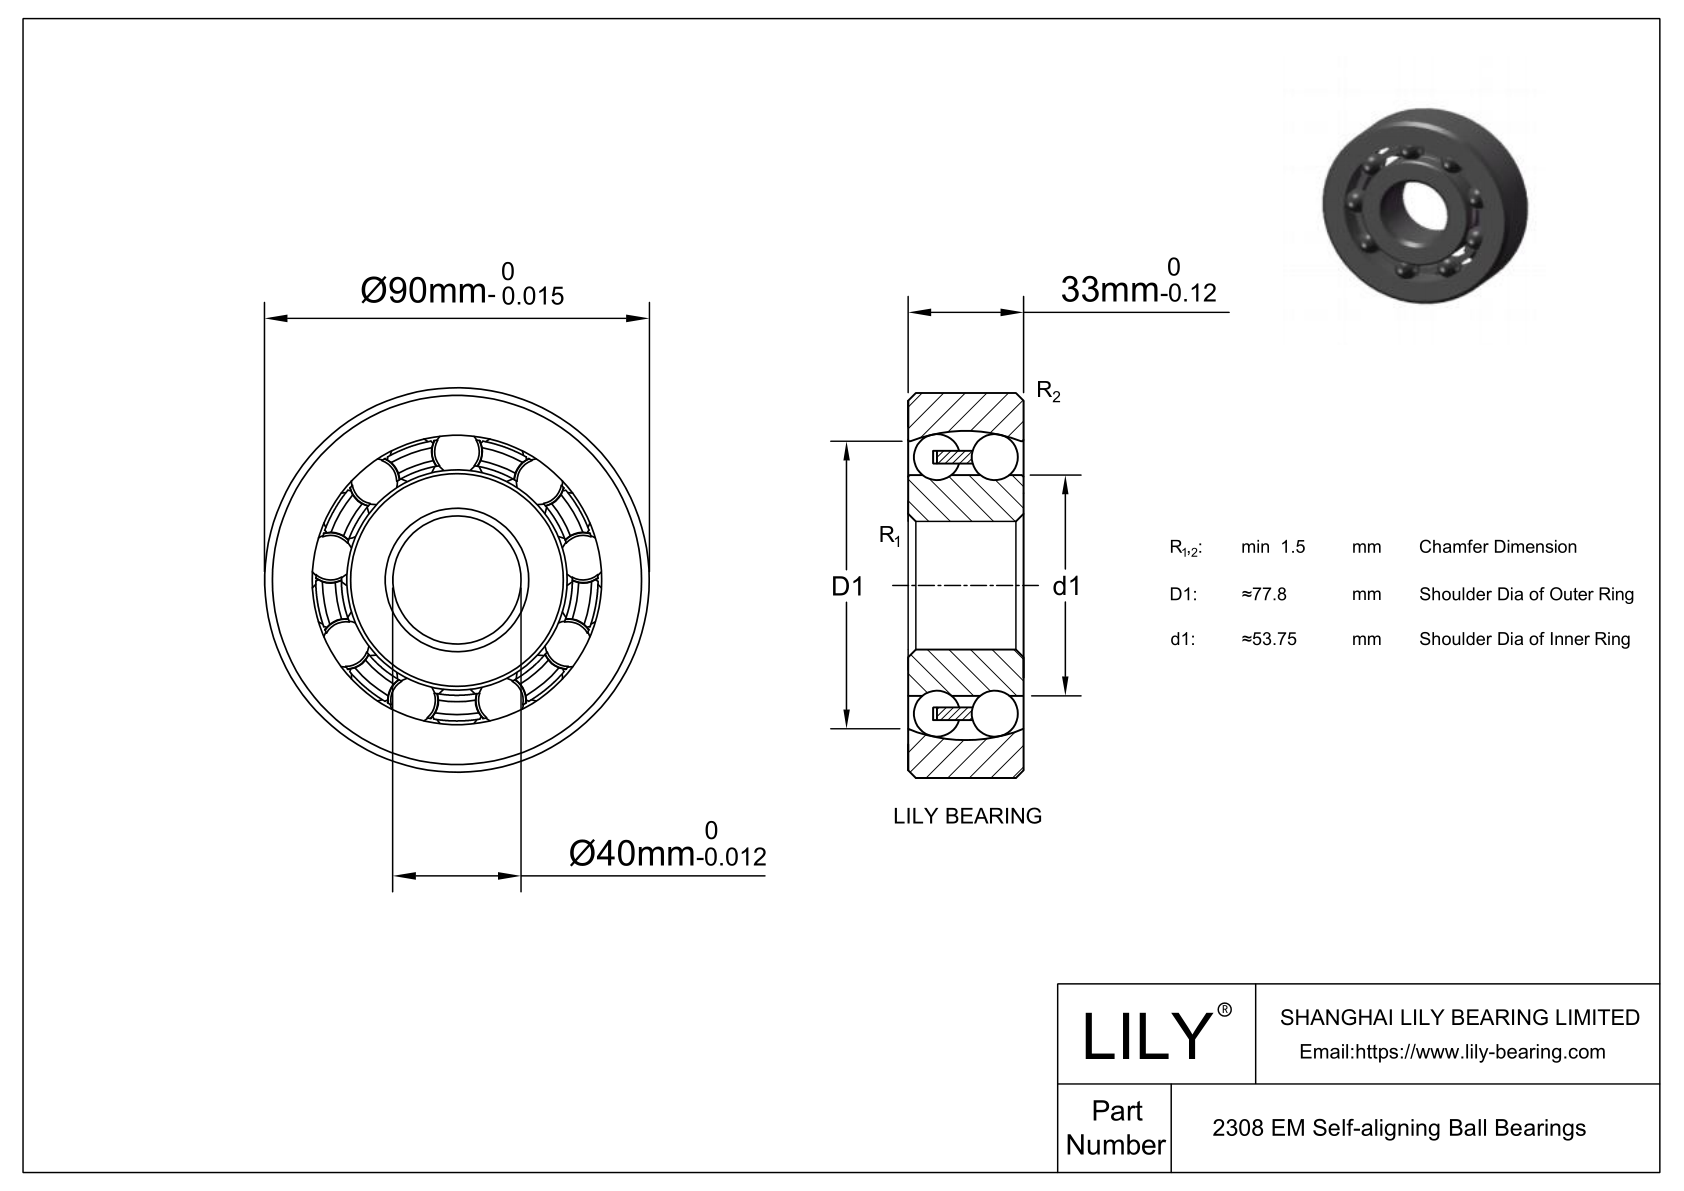 S2308 EM Stainless Steel Self Aligning Ball Bearings cad drawing